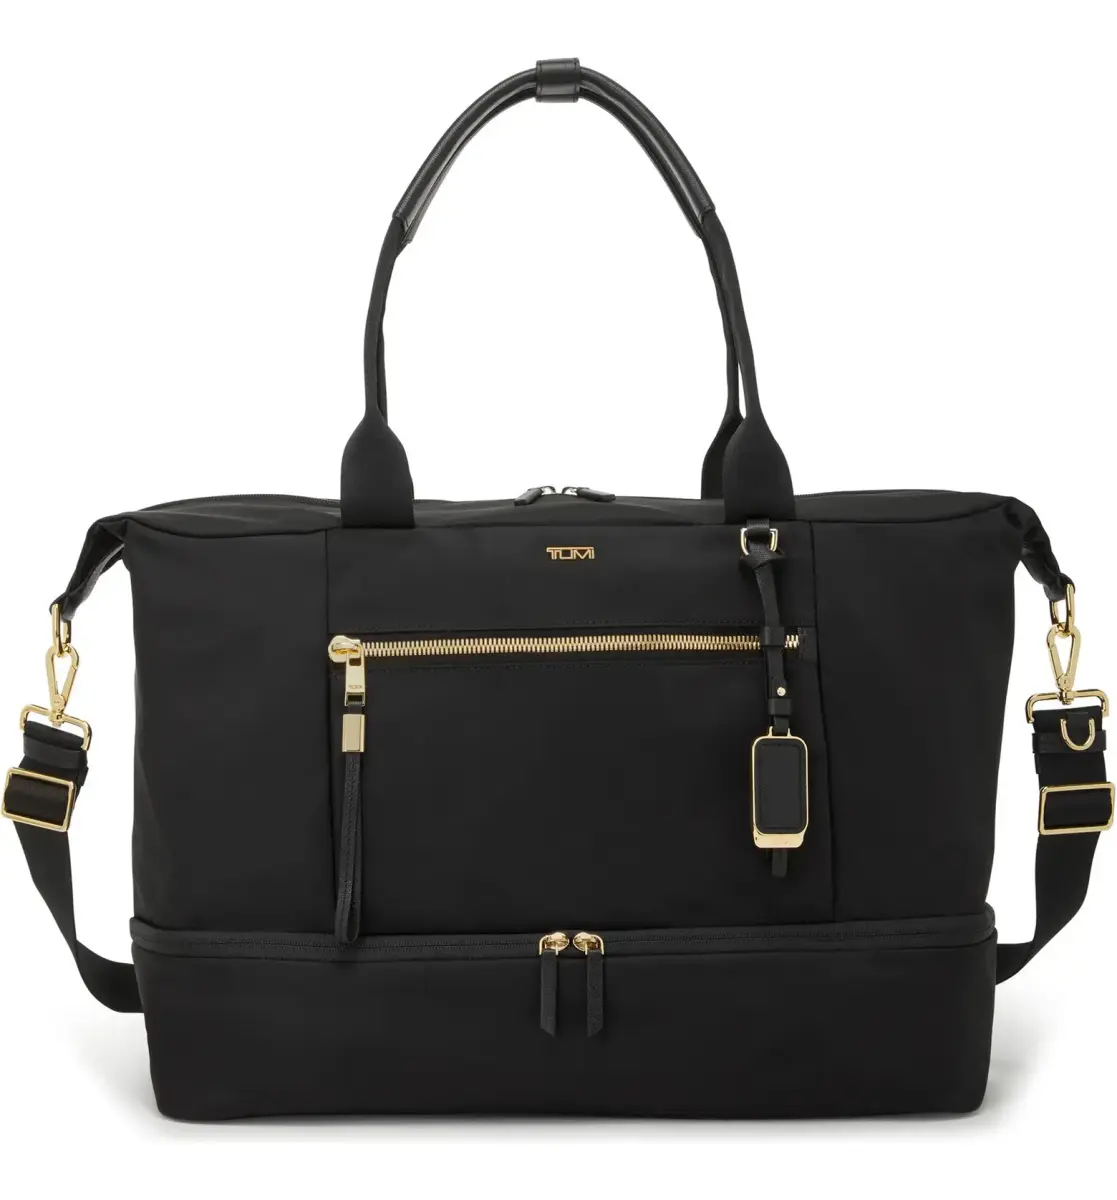 23 Stylish Weekender Bags That Make It Seem Like You Totally Didn't ...